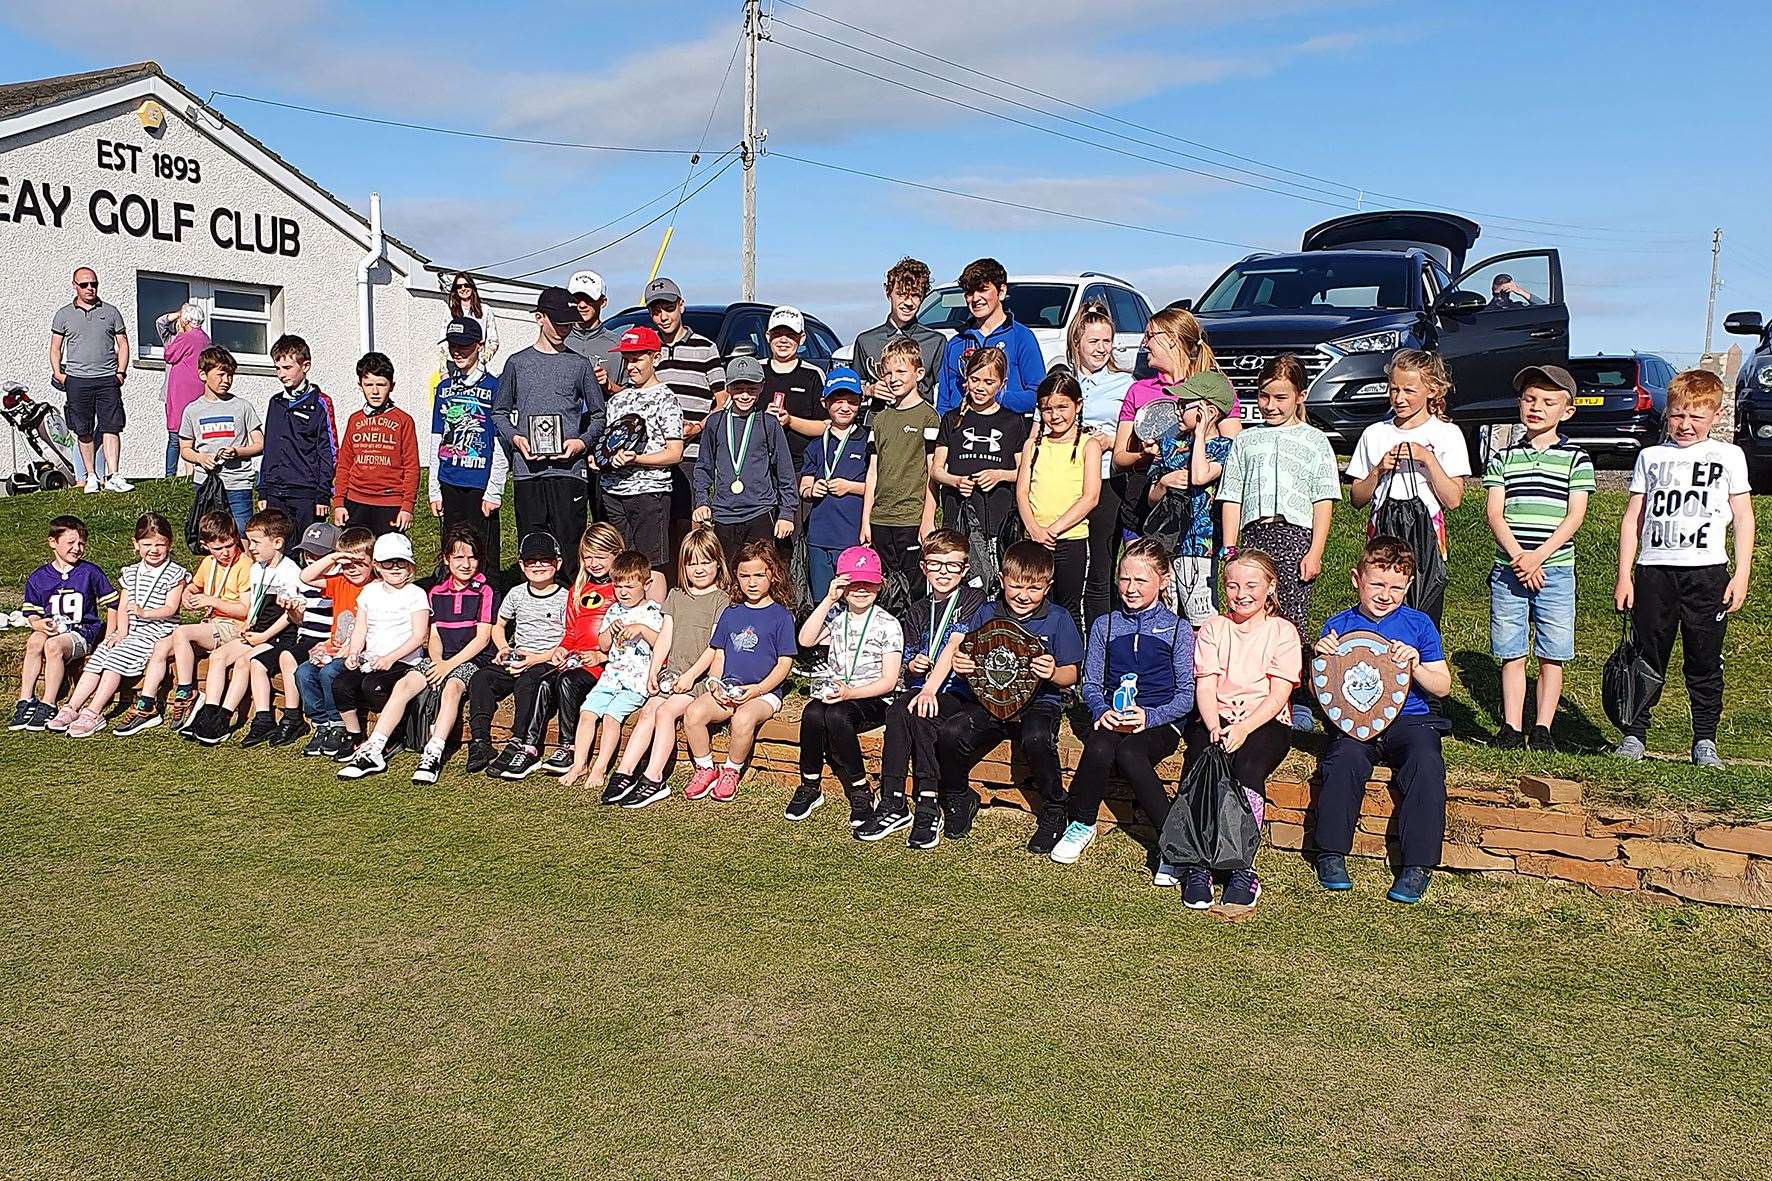 Youngsters who took part in the recent Reay Golf Club Junior Open, competing in various sections.